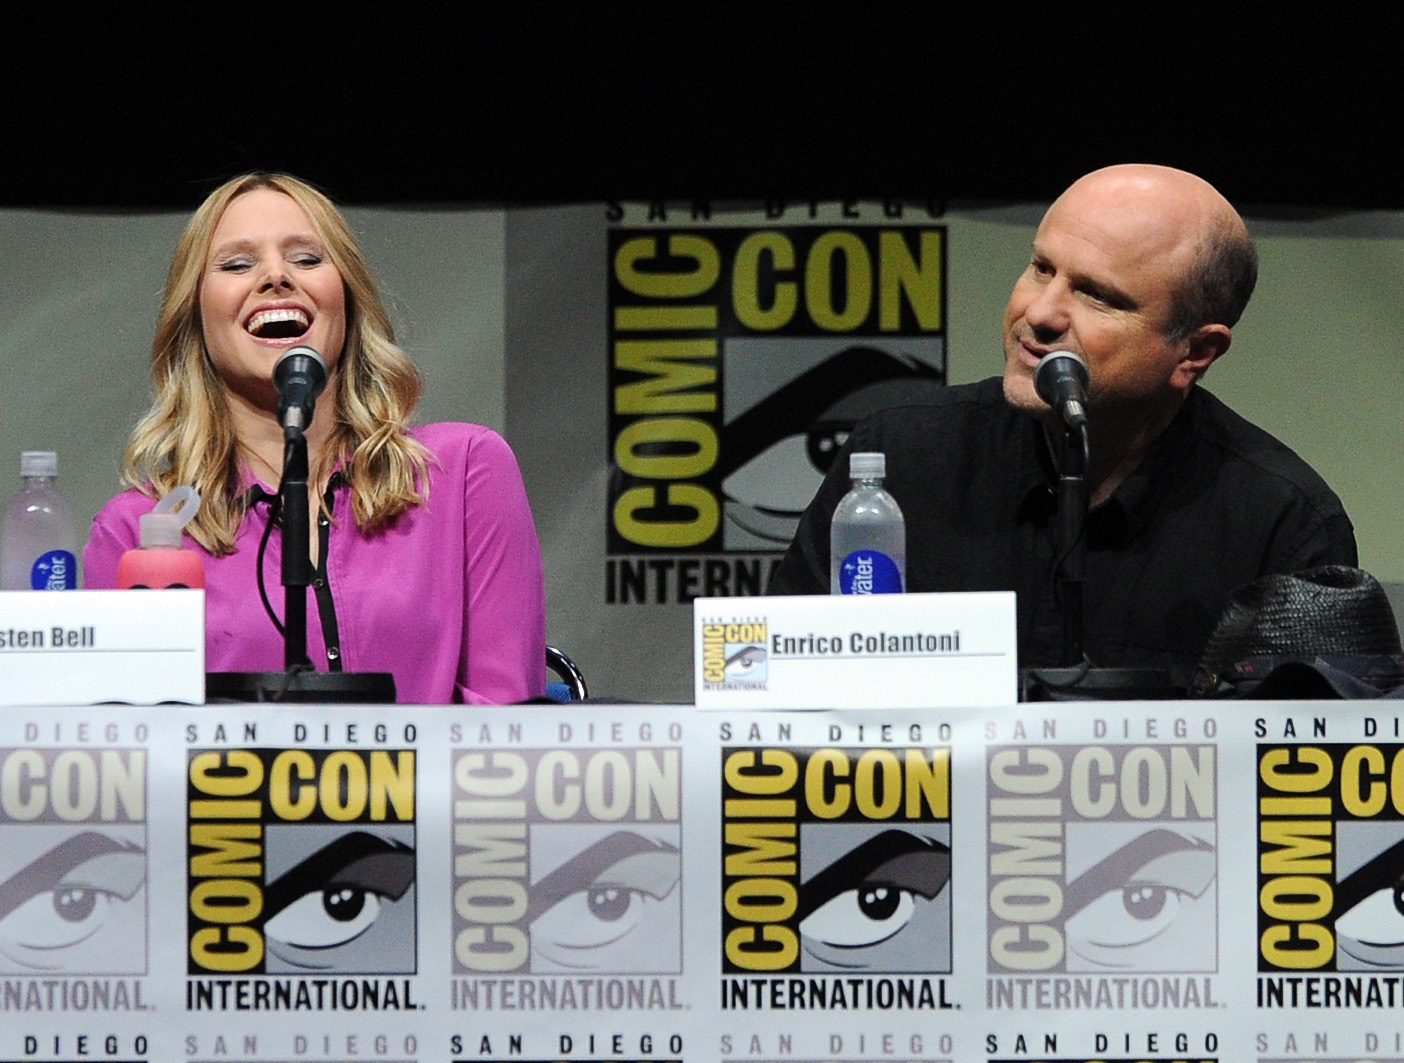 Kristen Bell and Enrico Colantoni at event of Veronica Mars (2014)